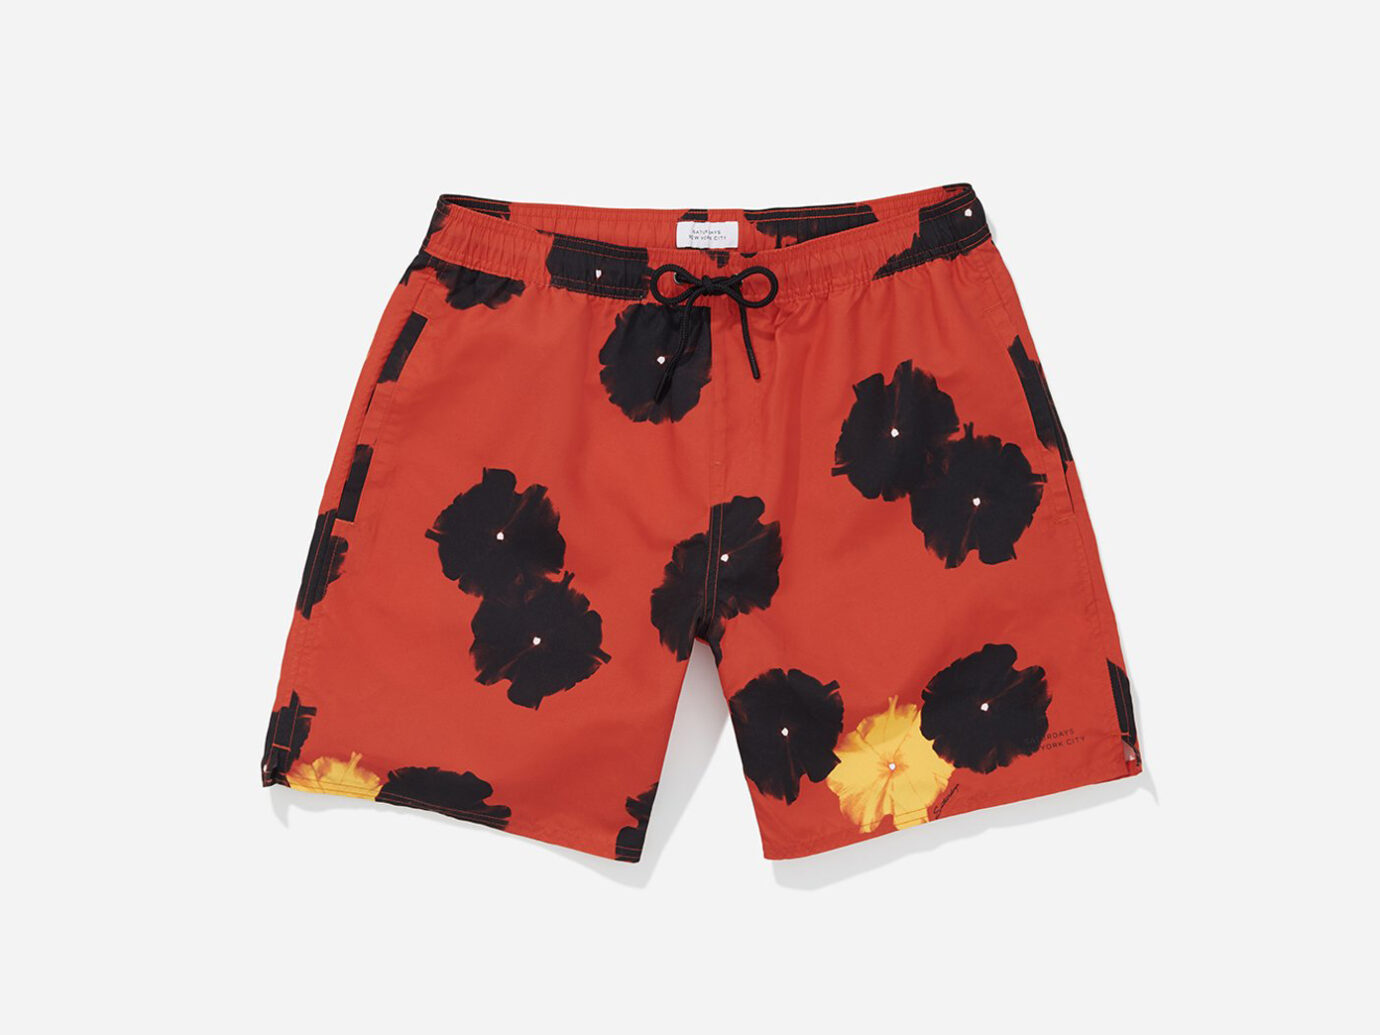 Mens Quick Dry Swim Trunks Swimming Shorts with Mesh Liner Pitbull Terriers Florals